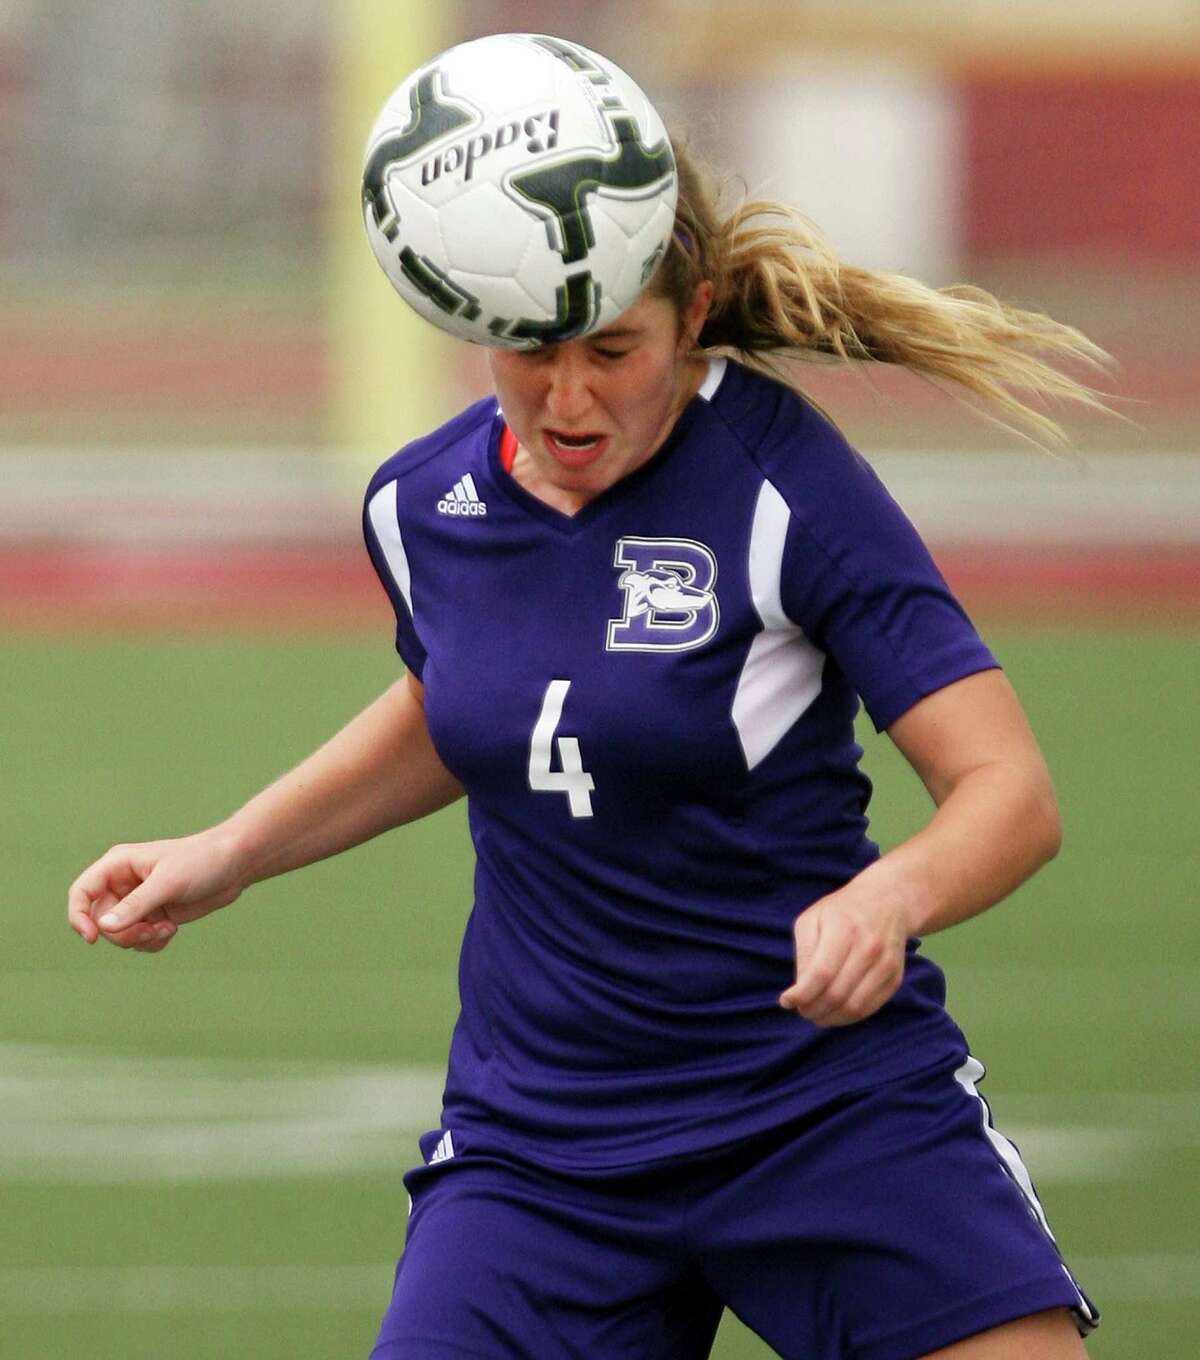 Boerne's Alexandra Chapman, 4, heads the ball in a in a 4A regional semifinal game against Kingsville April 10, 2015 in Mission.